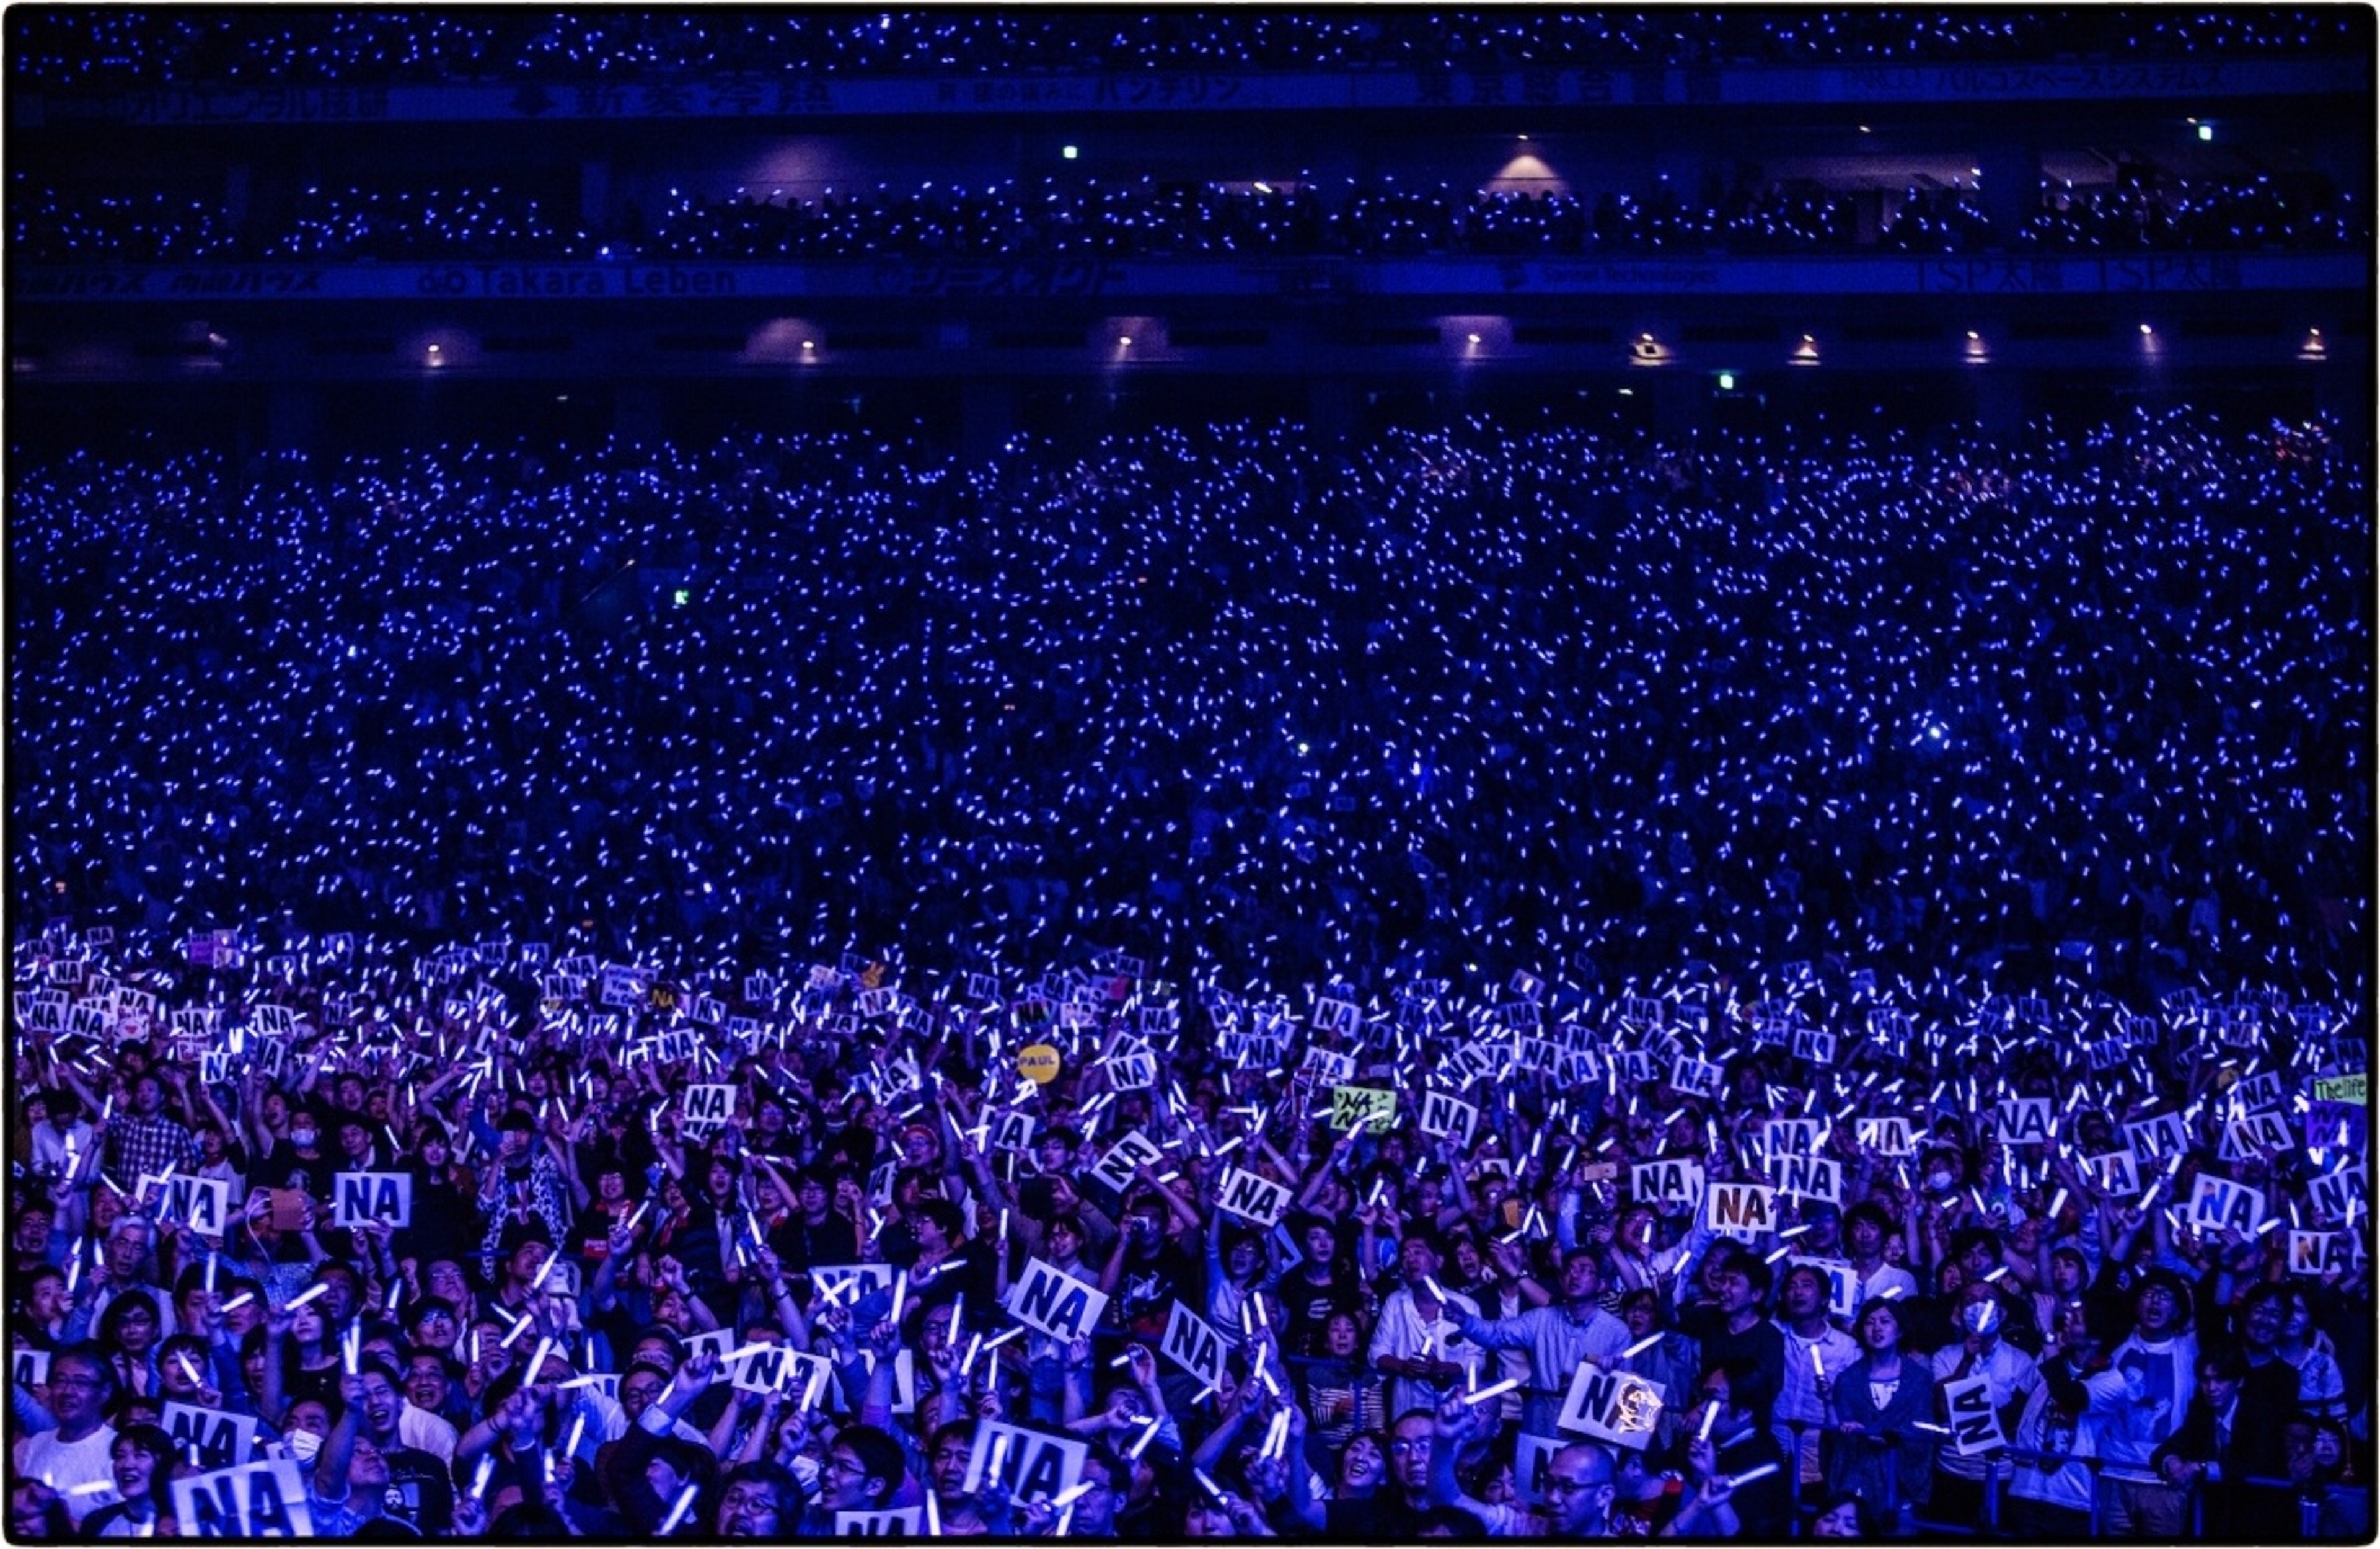 The crowd surprising Paul during his third show at the Tokyo Dome, 2017